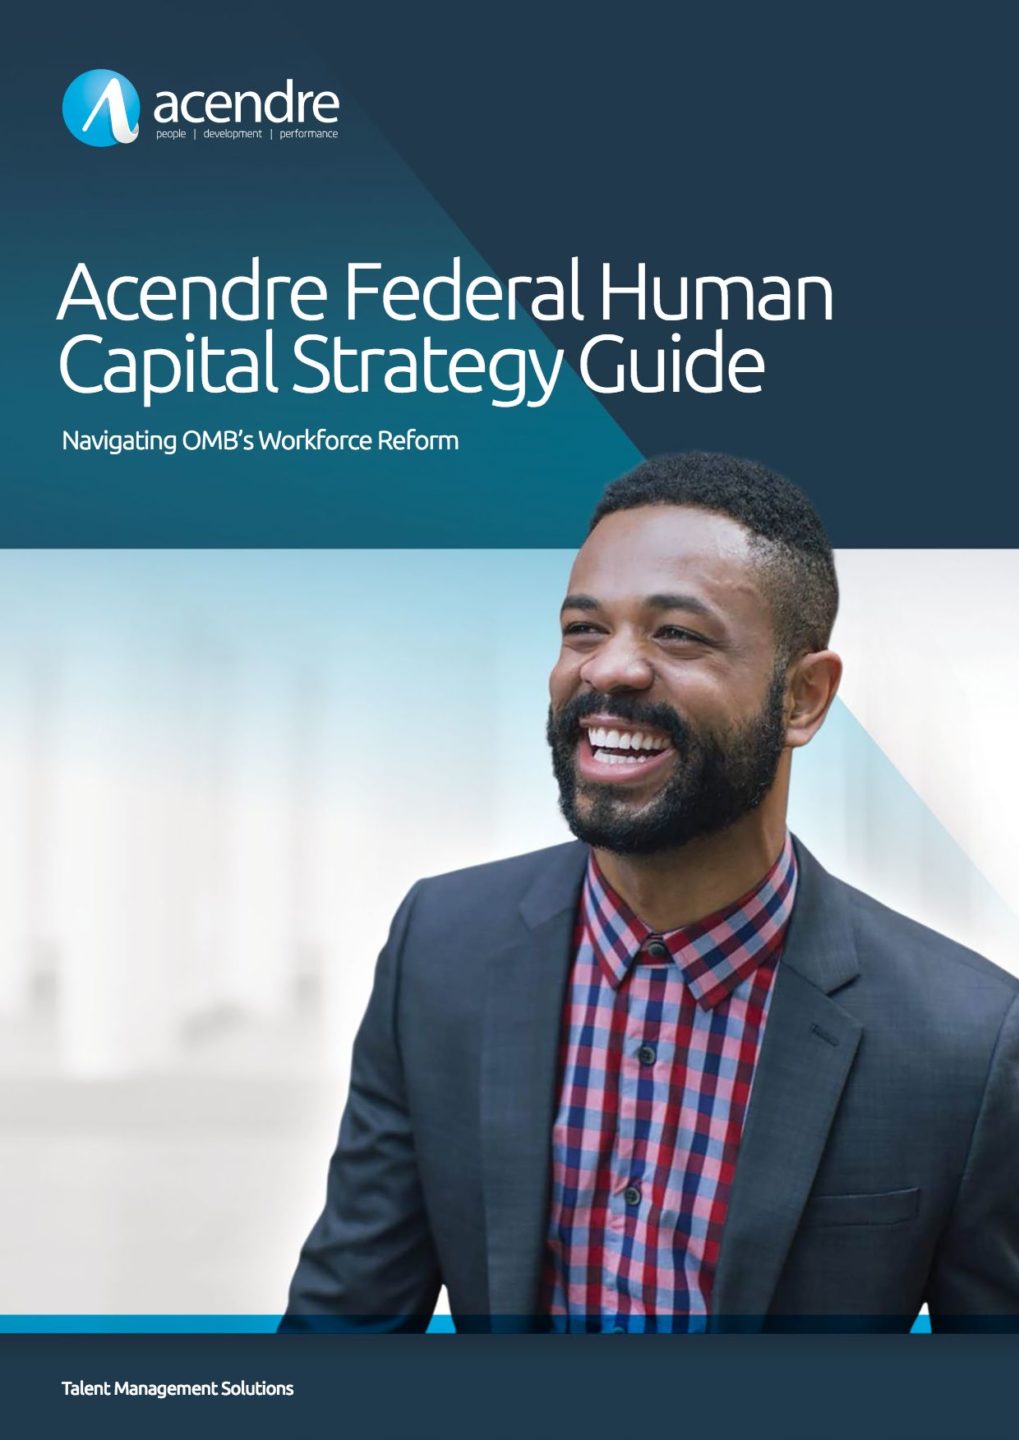 Acendre Federal Human Capital Strategy Guide Navigating OMB’s Workforce Reform